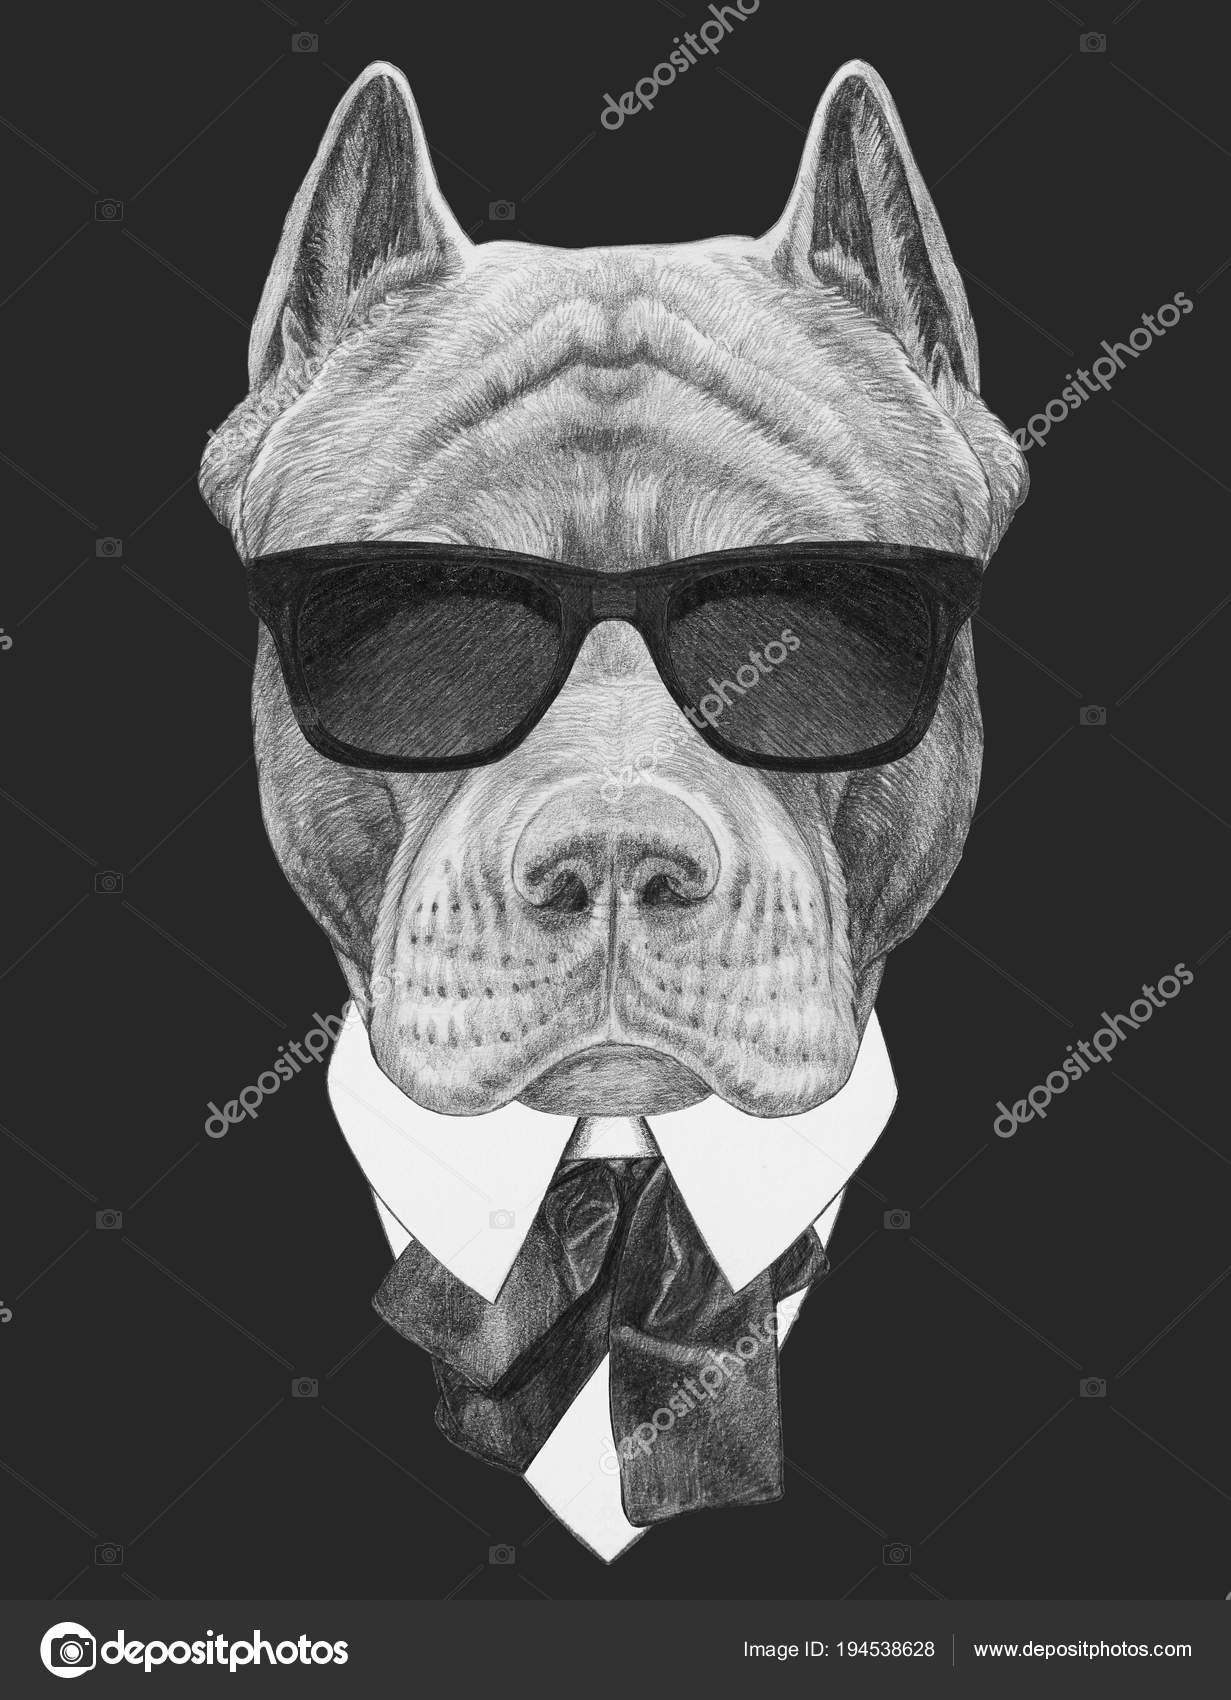 Download Funny Sketch Pit Bull Portrait Hipster Sunglasses Shirt Bow Tie Stock Photo Image By C Victoria Novak 194538628